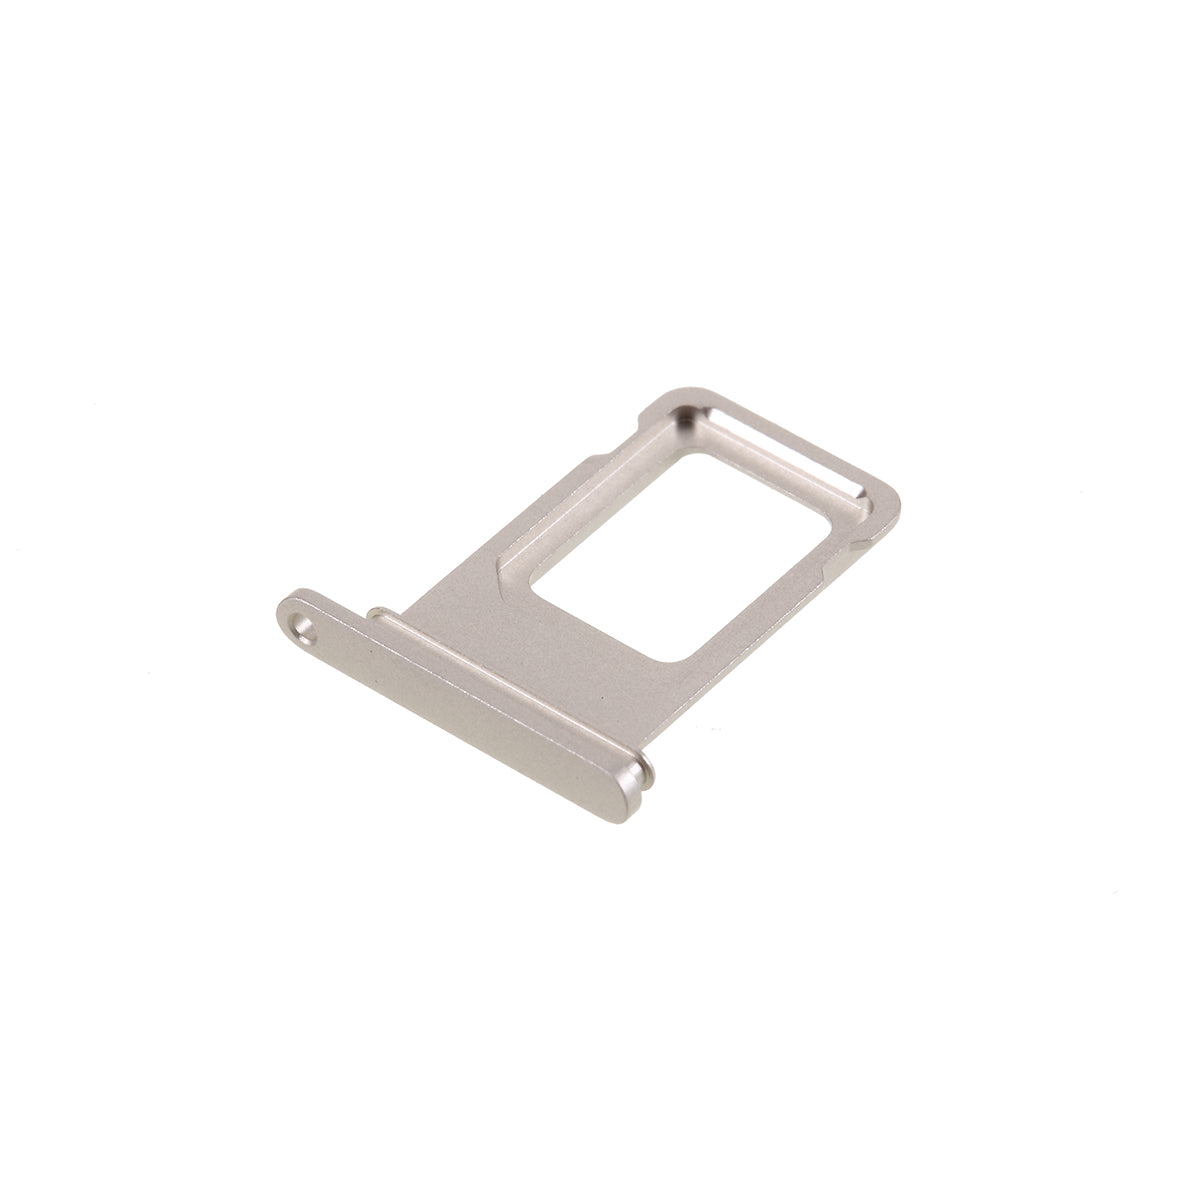 OEM SIM Card Tray Holder Replace Part for Apple iPhone 11 6.1 inch - White